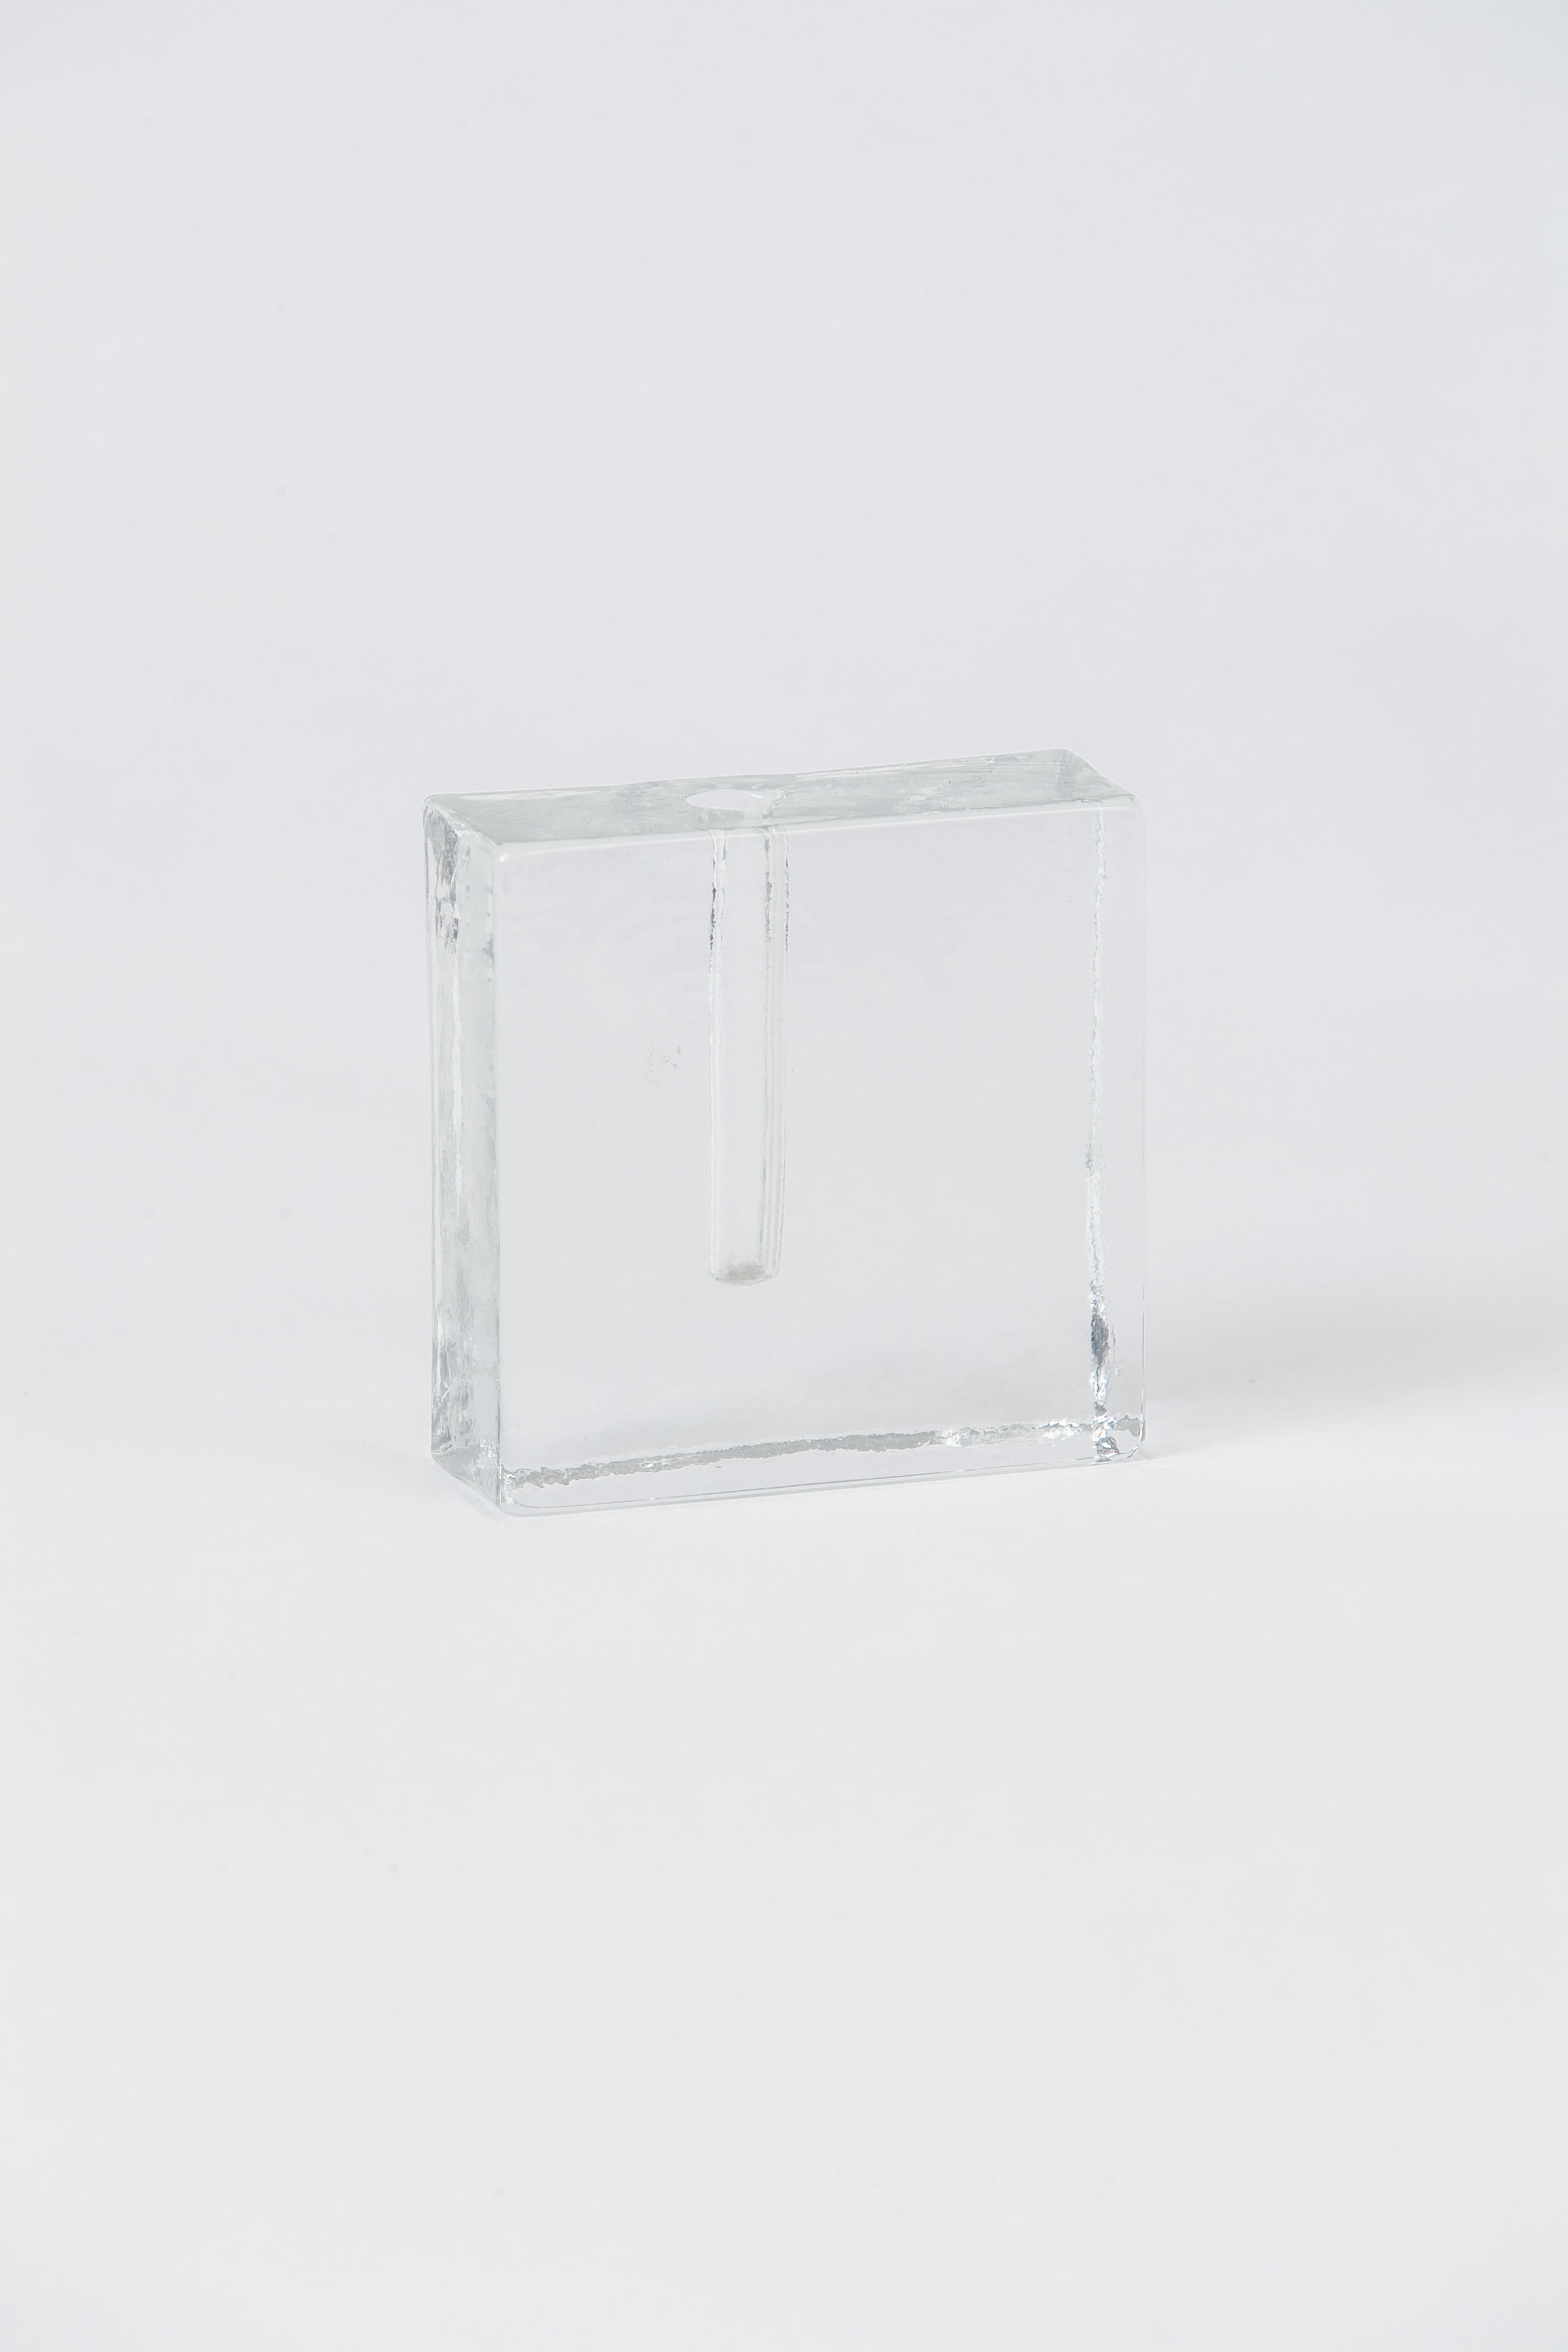 A striated solid glass square bud vase in excellent condition.